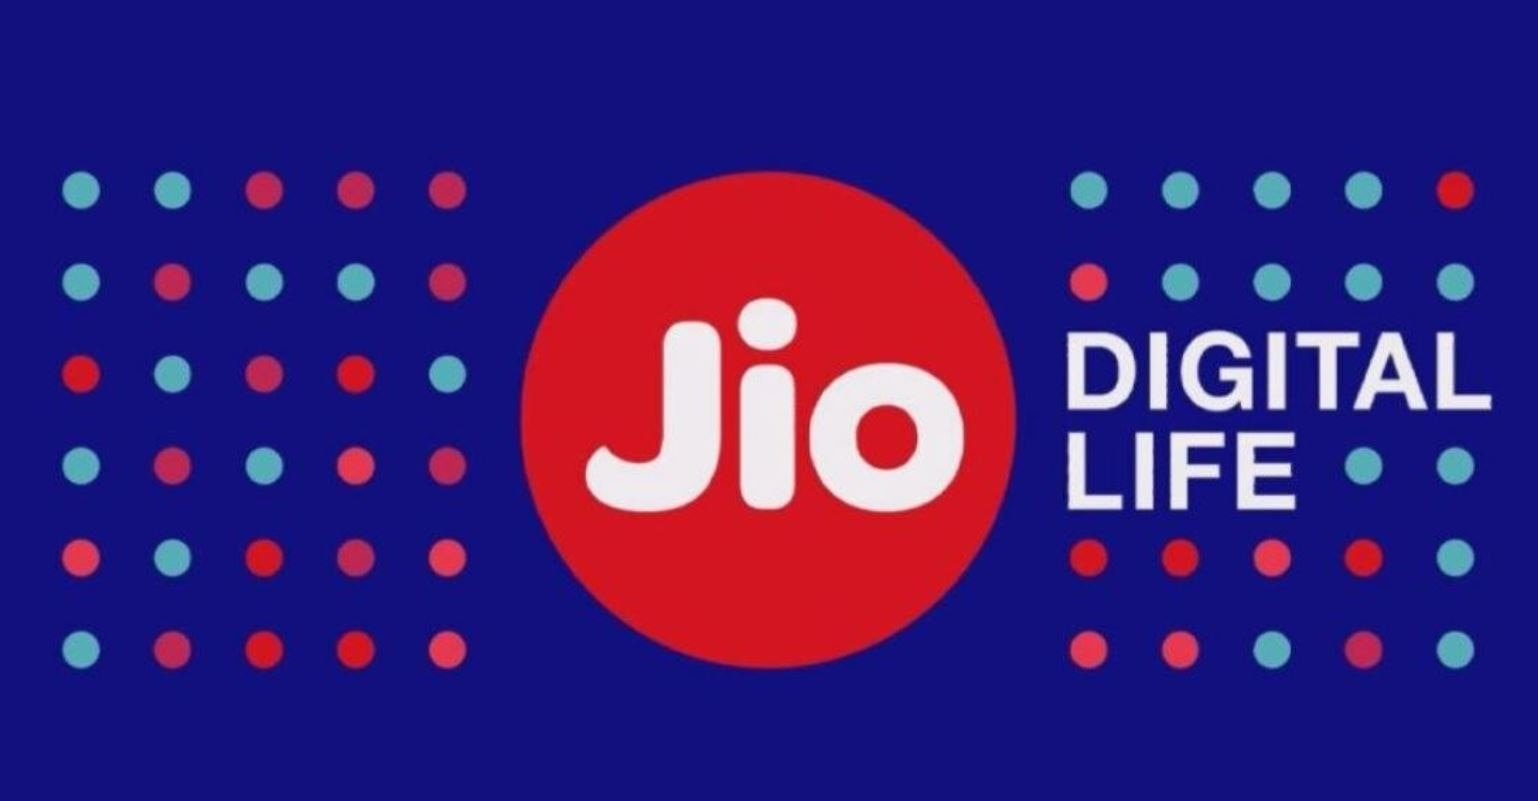 This prepaid plan of Reliance Jio lasts for a whole month instead of 28 days with data you will get many other benefits.